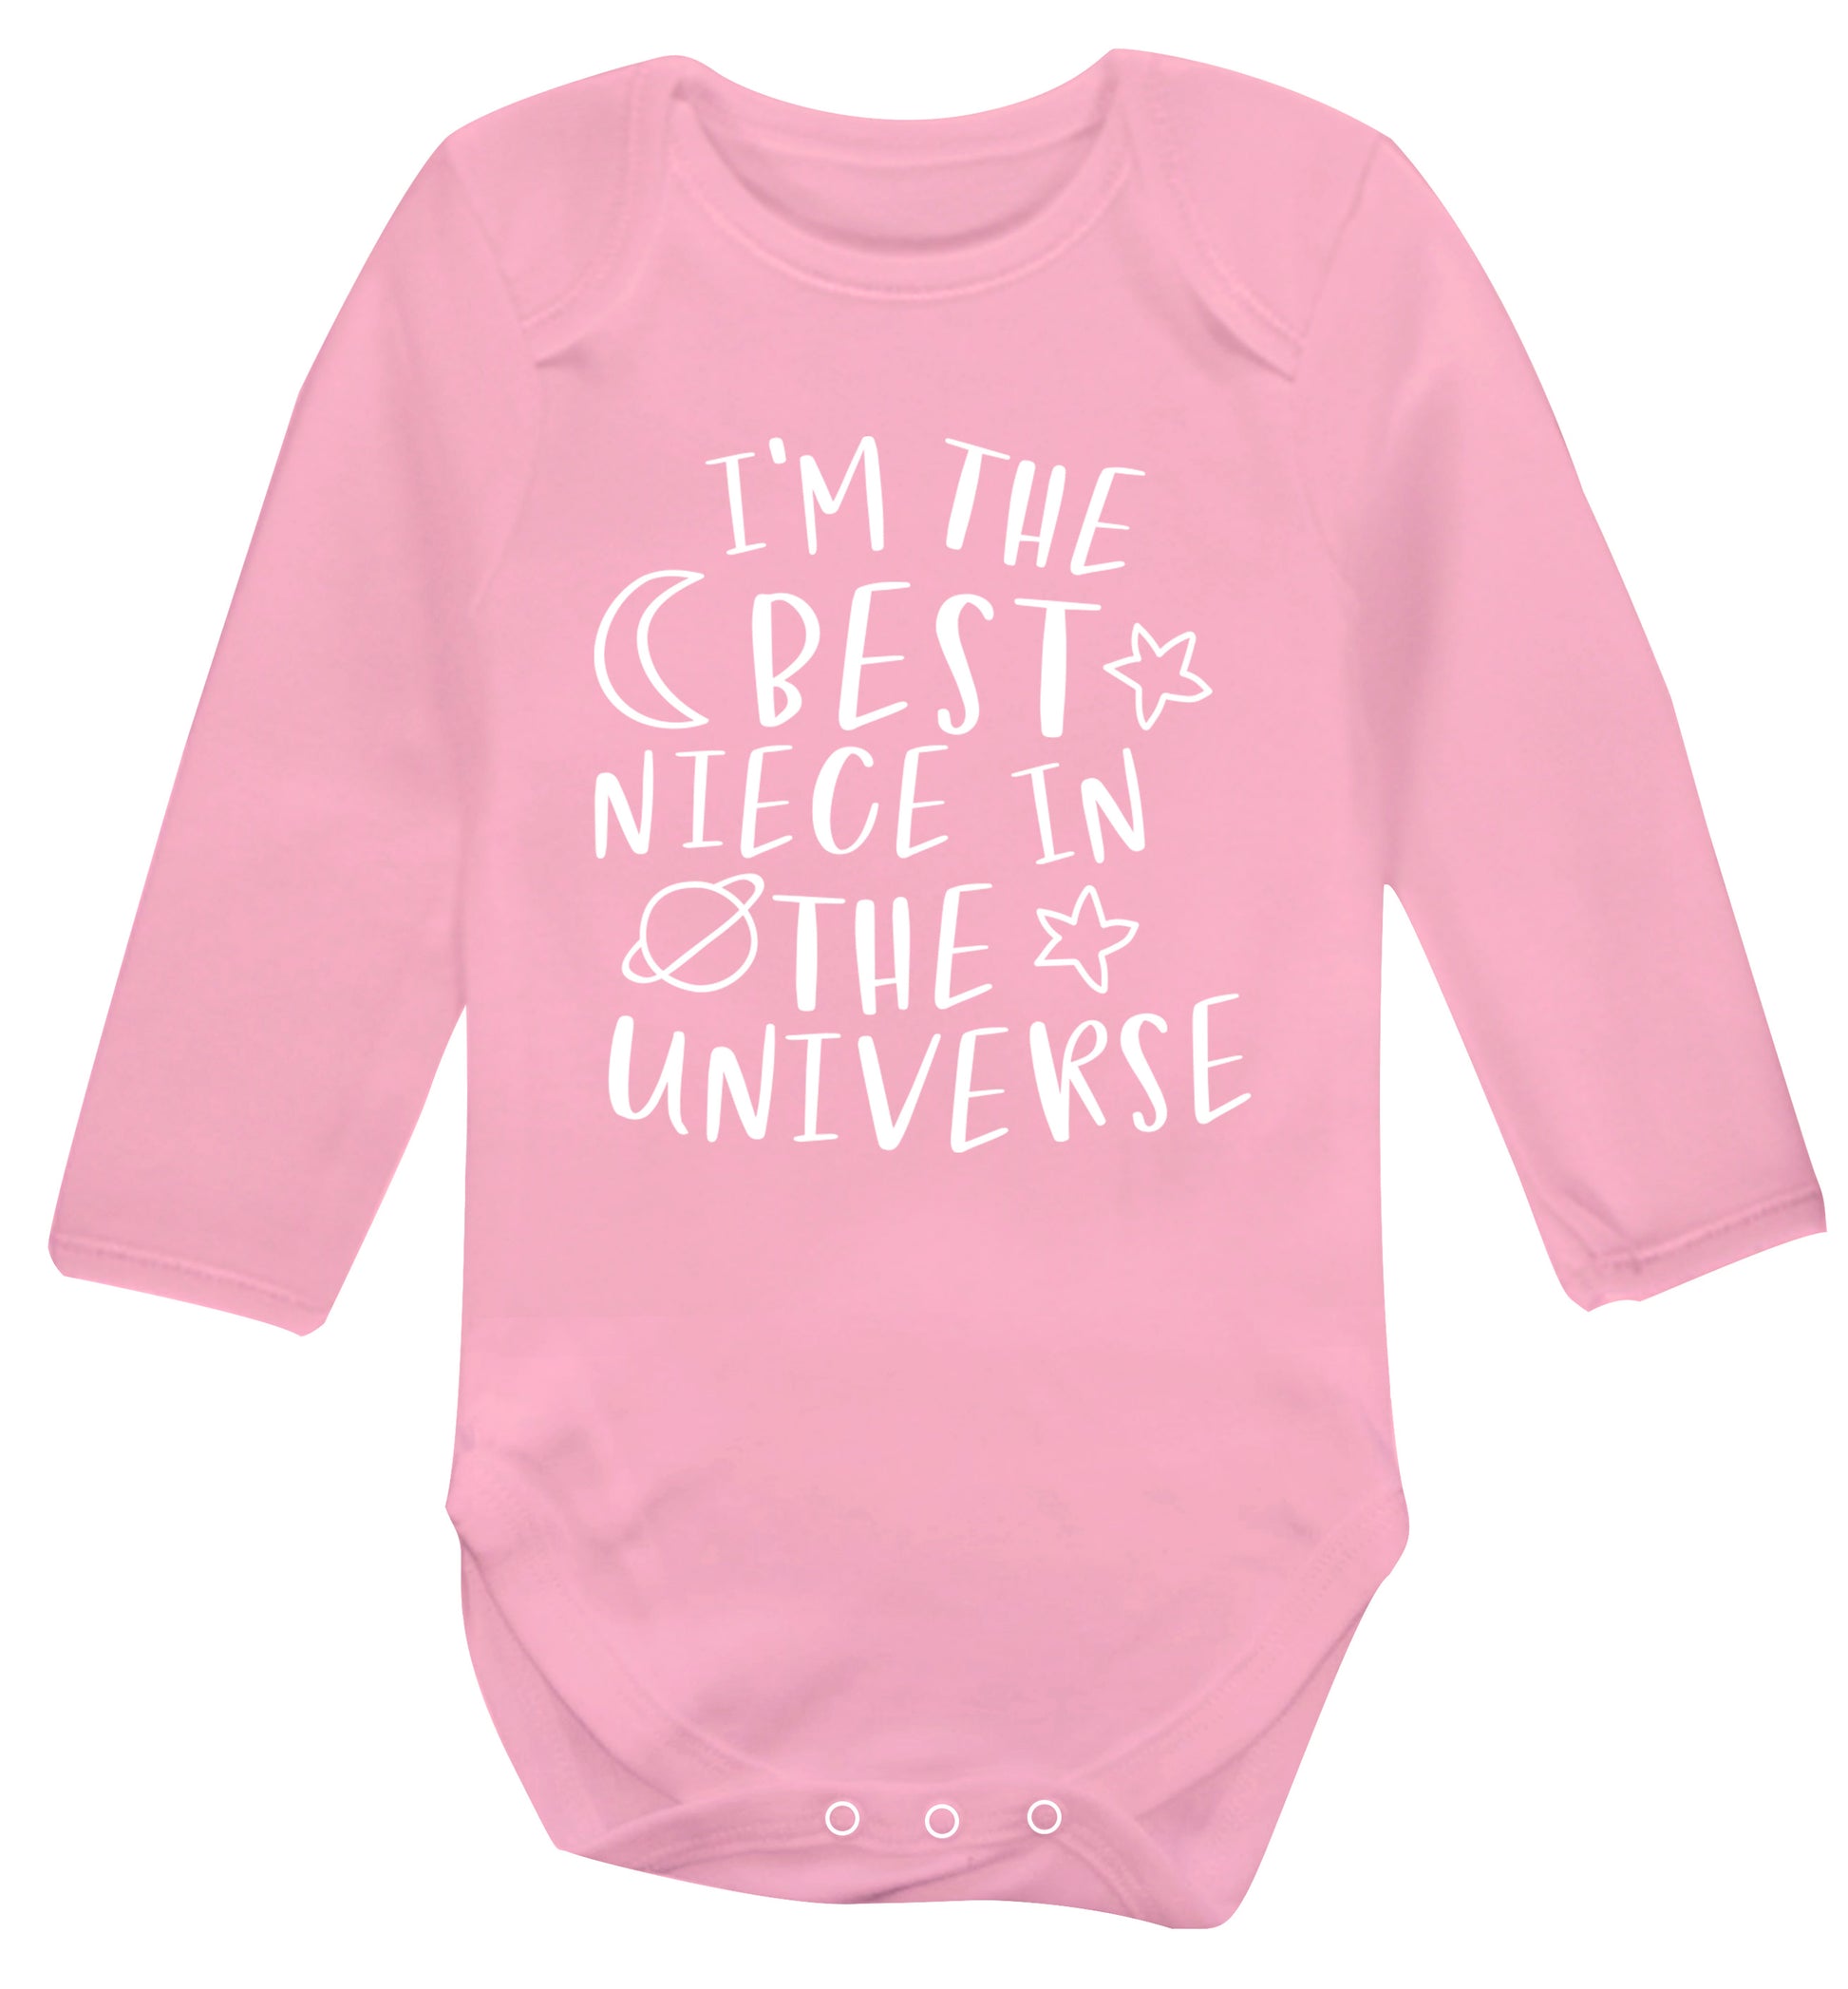 I'm the best niece in the universe Baby Vest long sleeved pale pink 6-12 months